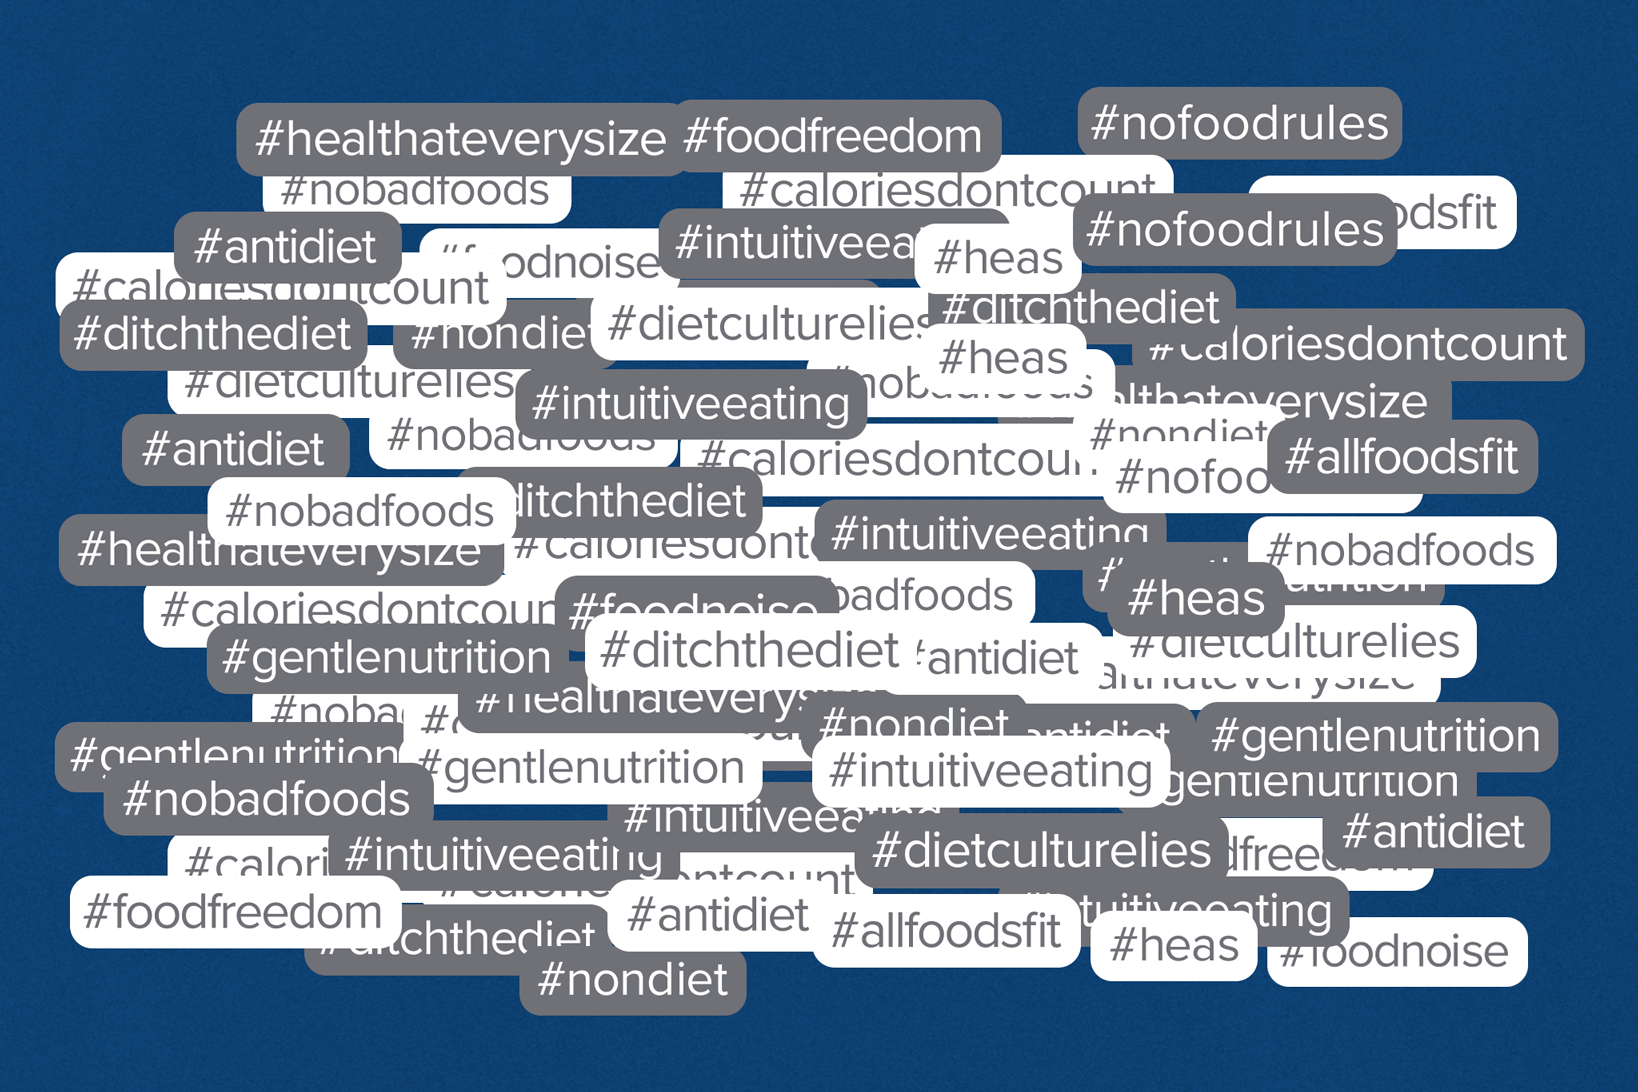 Several hashtags related to the anti-diet movement on social media appear and disappear, including #antidiet, #caloriesdontcount #nofoodrules and #healthateverysize